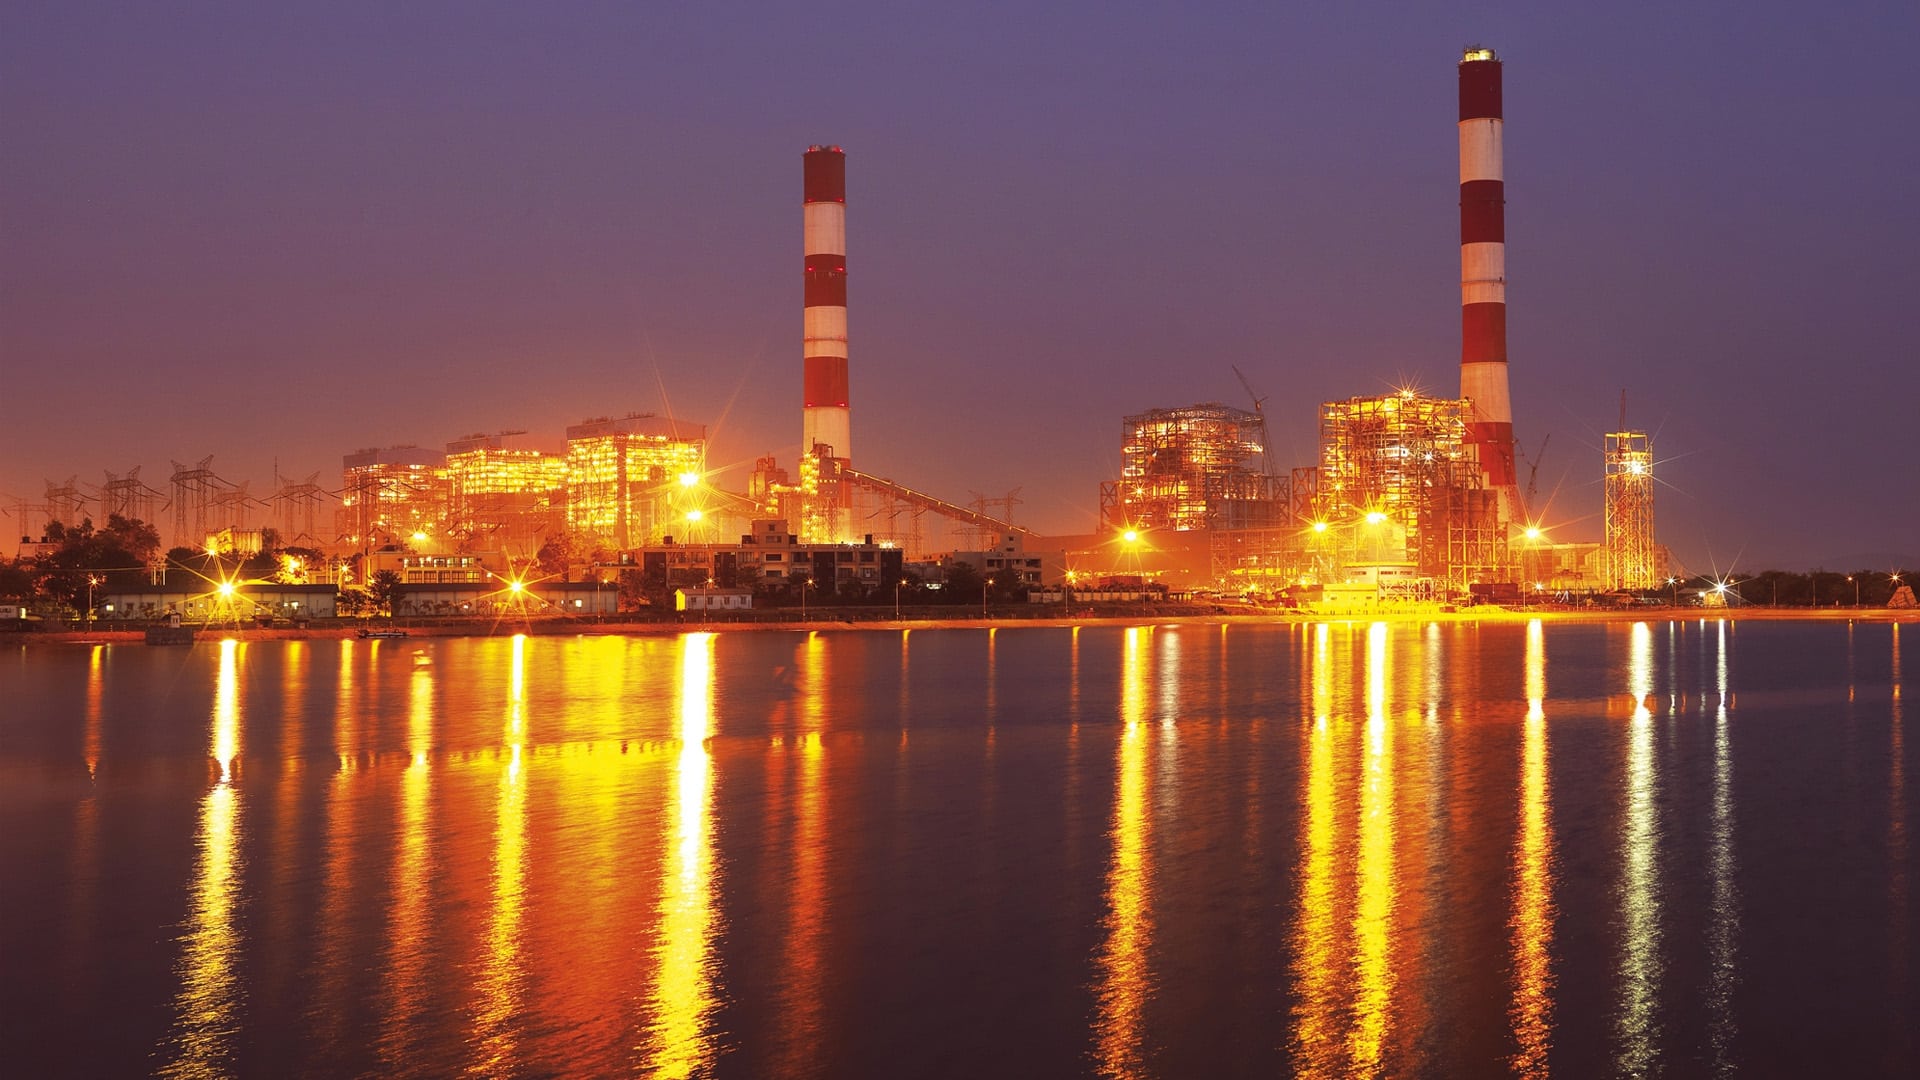 Adani Power gets NCLT nod to acquire Essar's 1,200 MW Mahan project